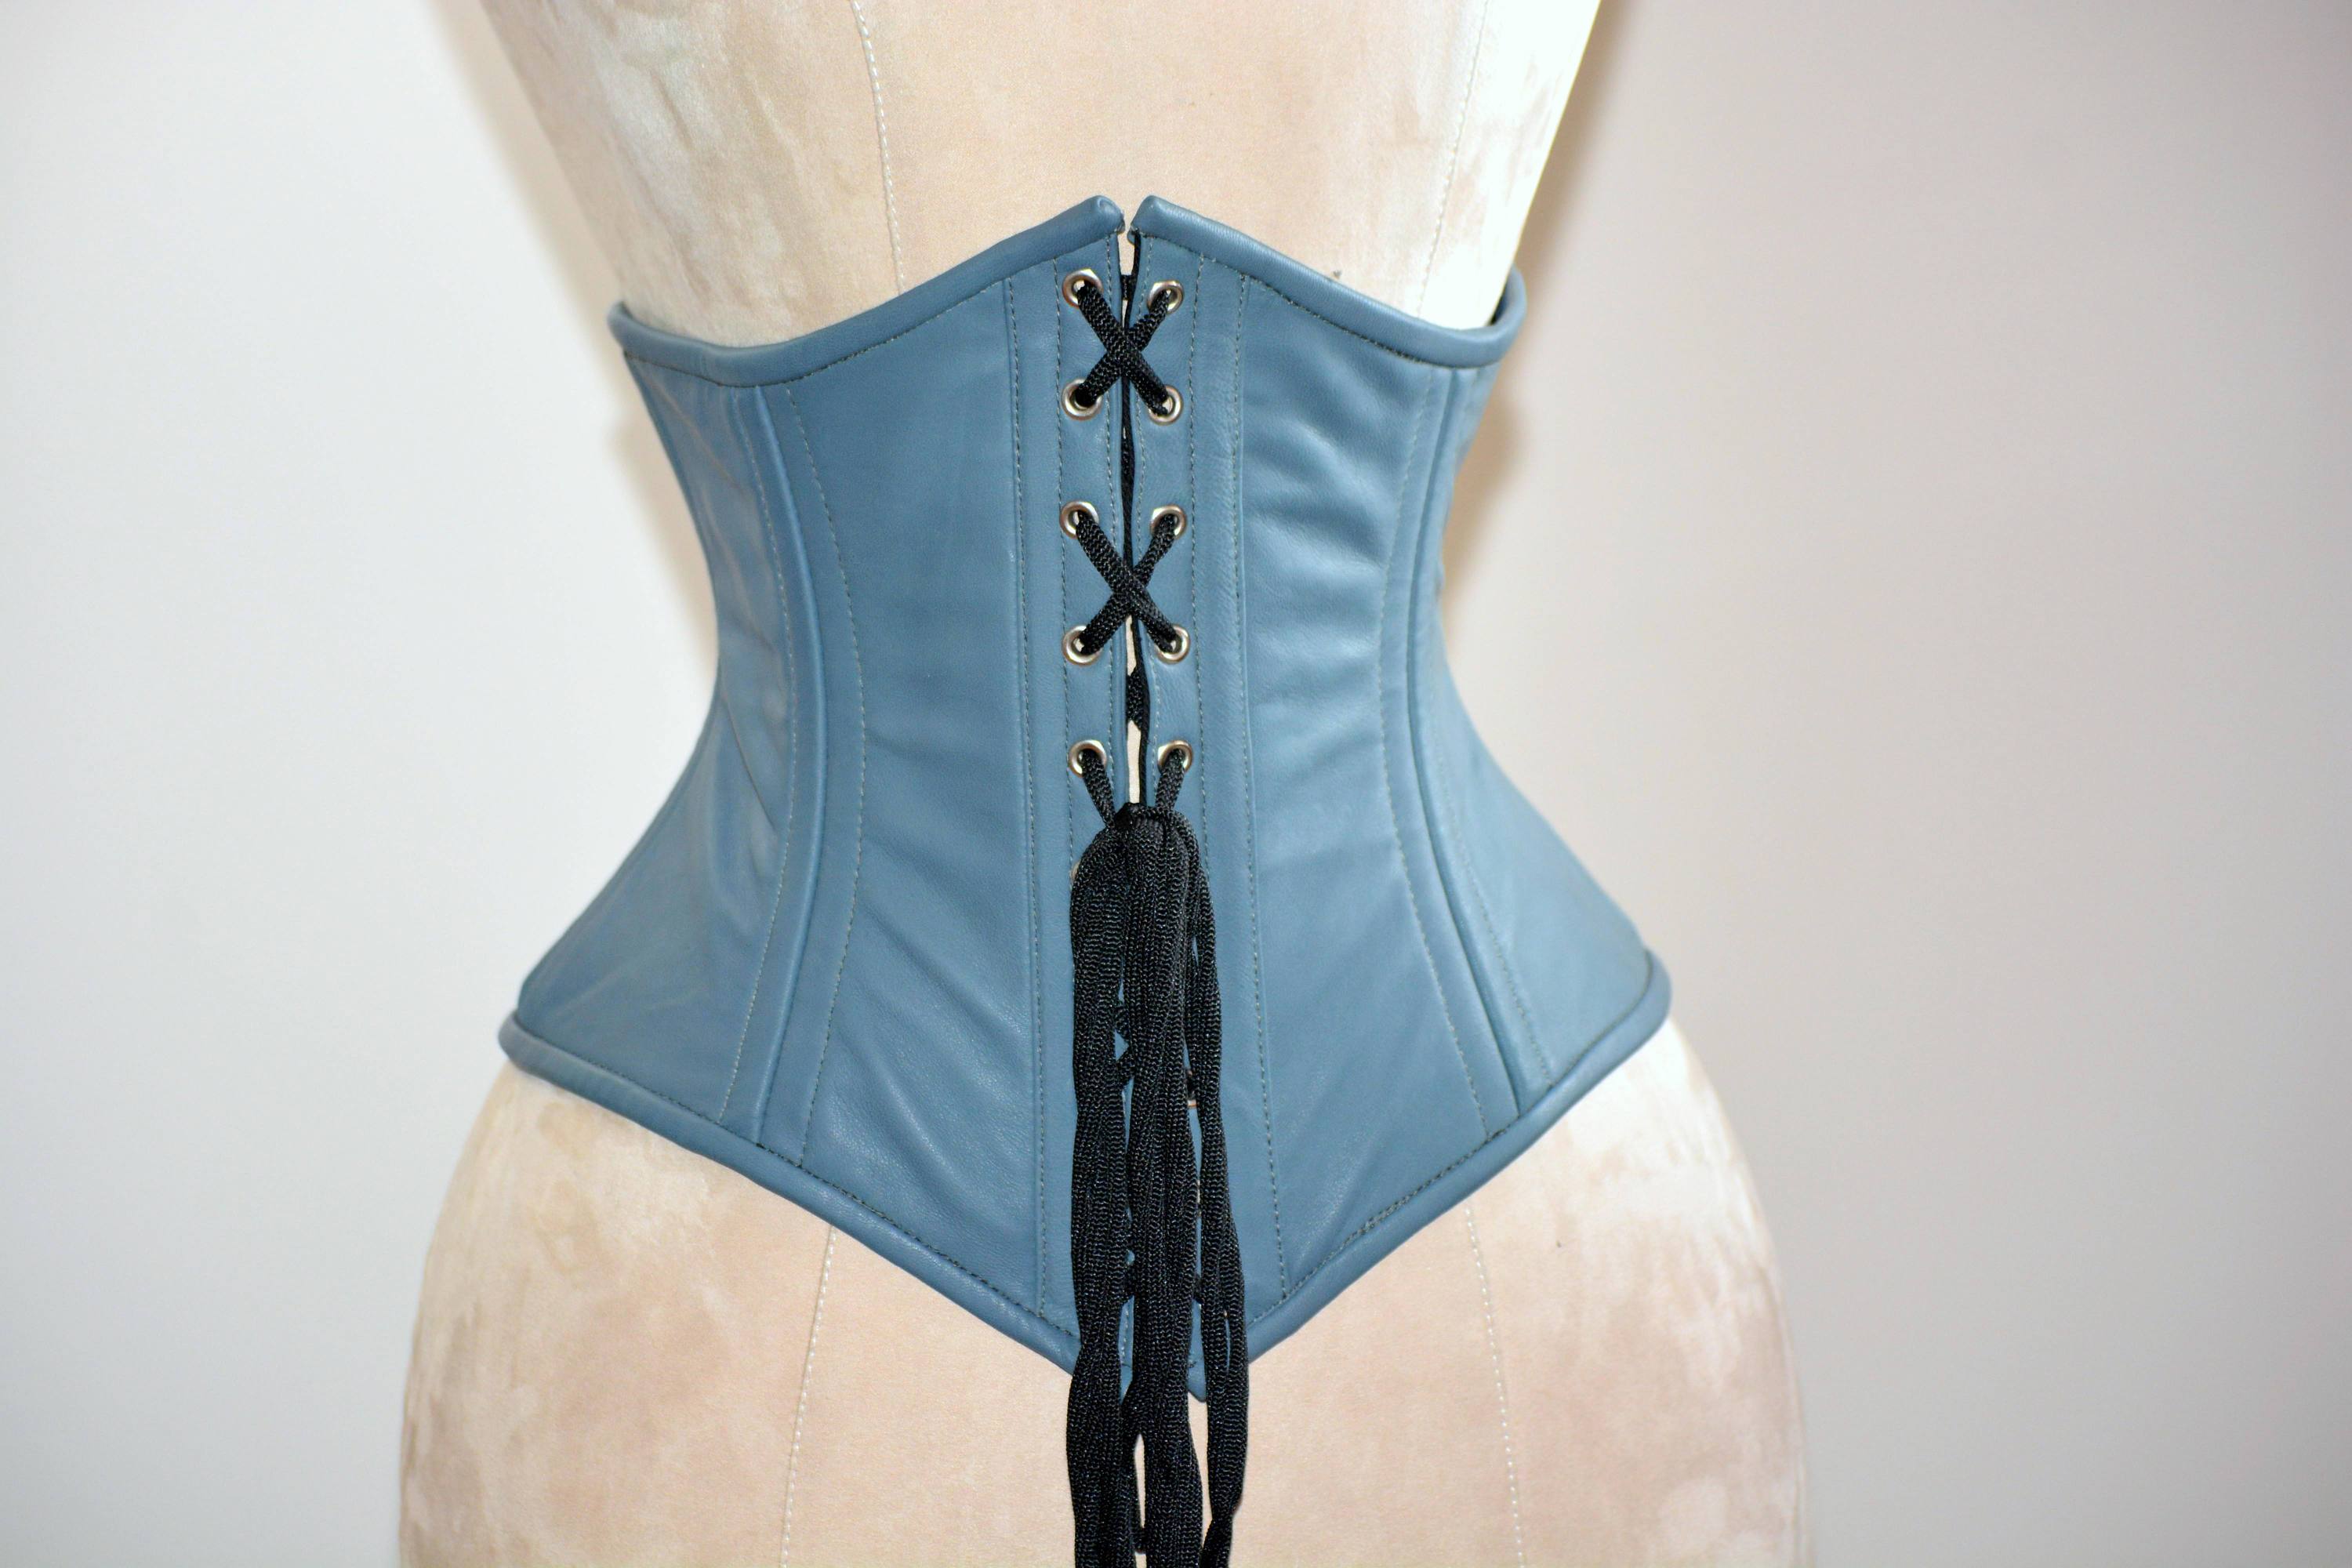 Strong Steel Boned Corsets for over 4” Waist Reduction - True Corset